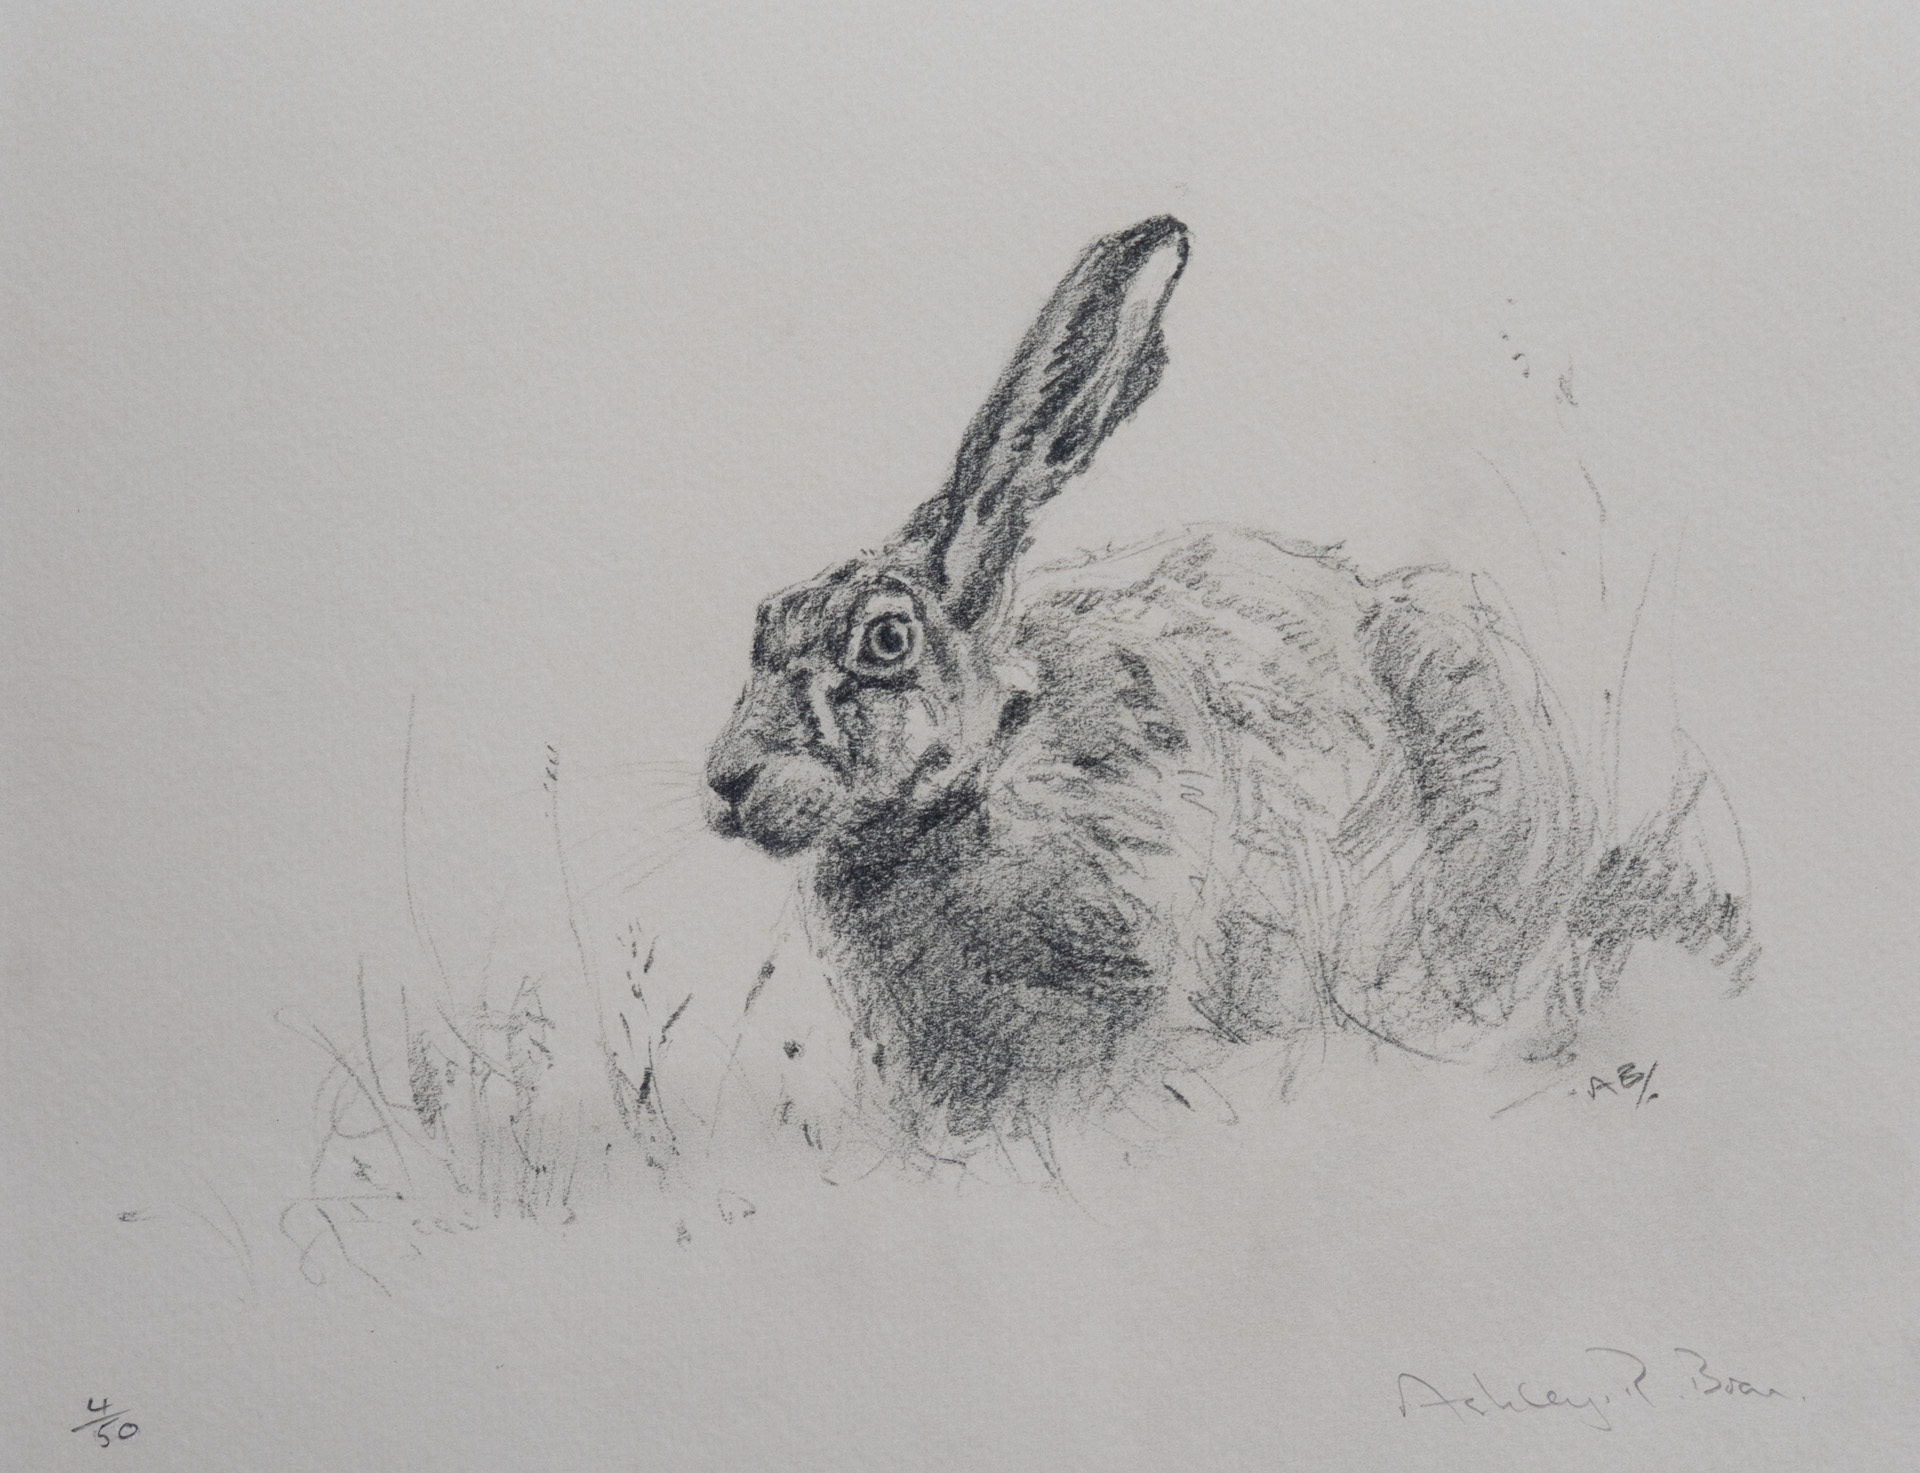 Brown Hare Sketch Limited Edition 50 Copies Only 10 X 1275